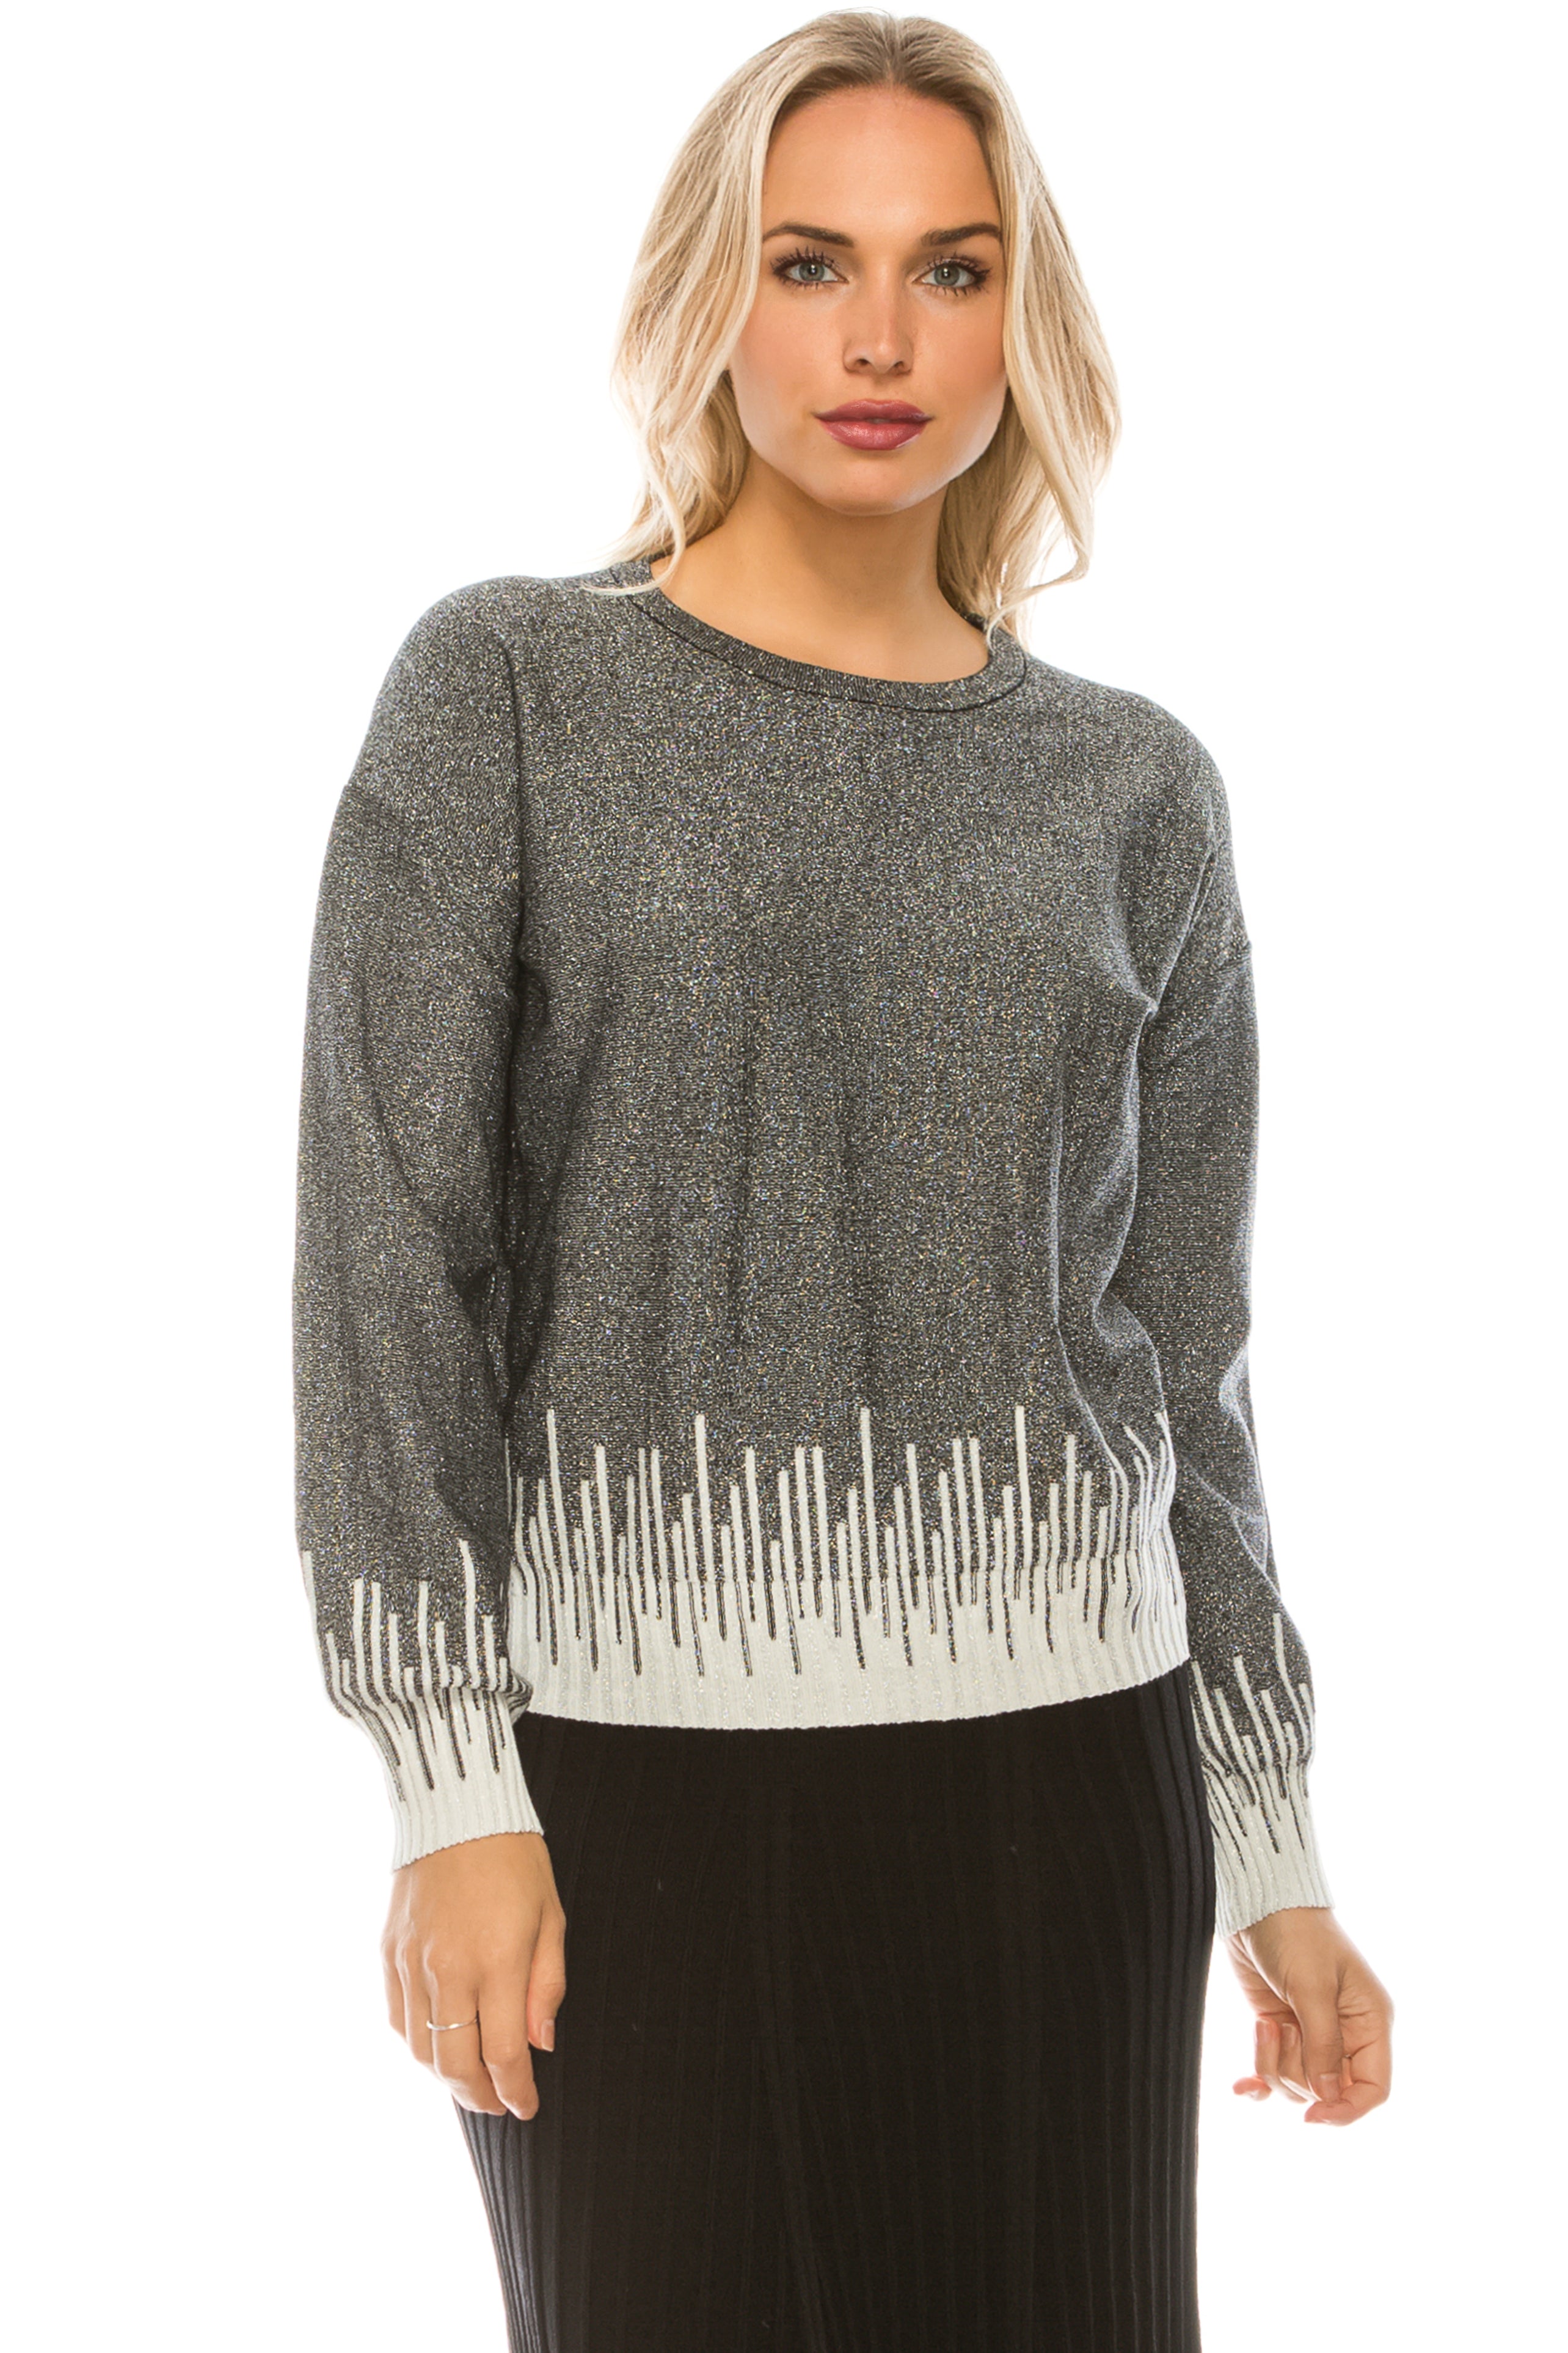 Shimmer White Contrast Sweater